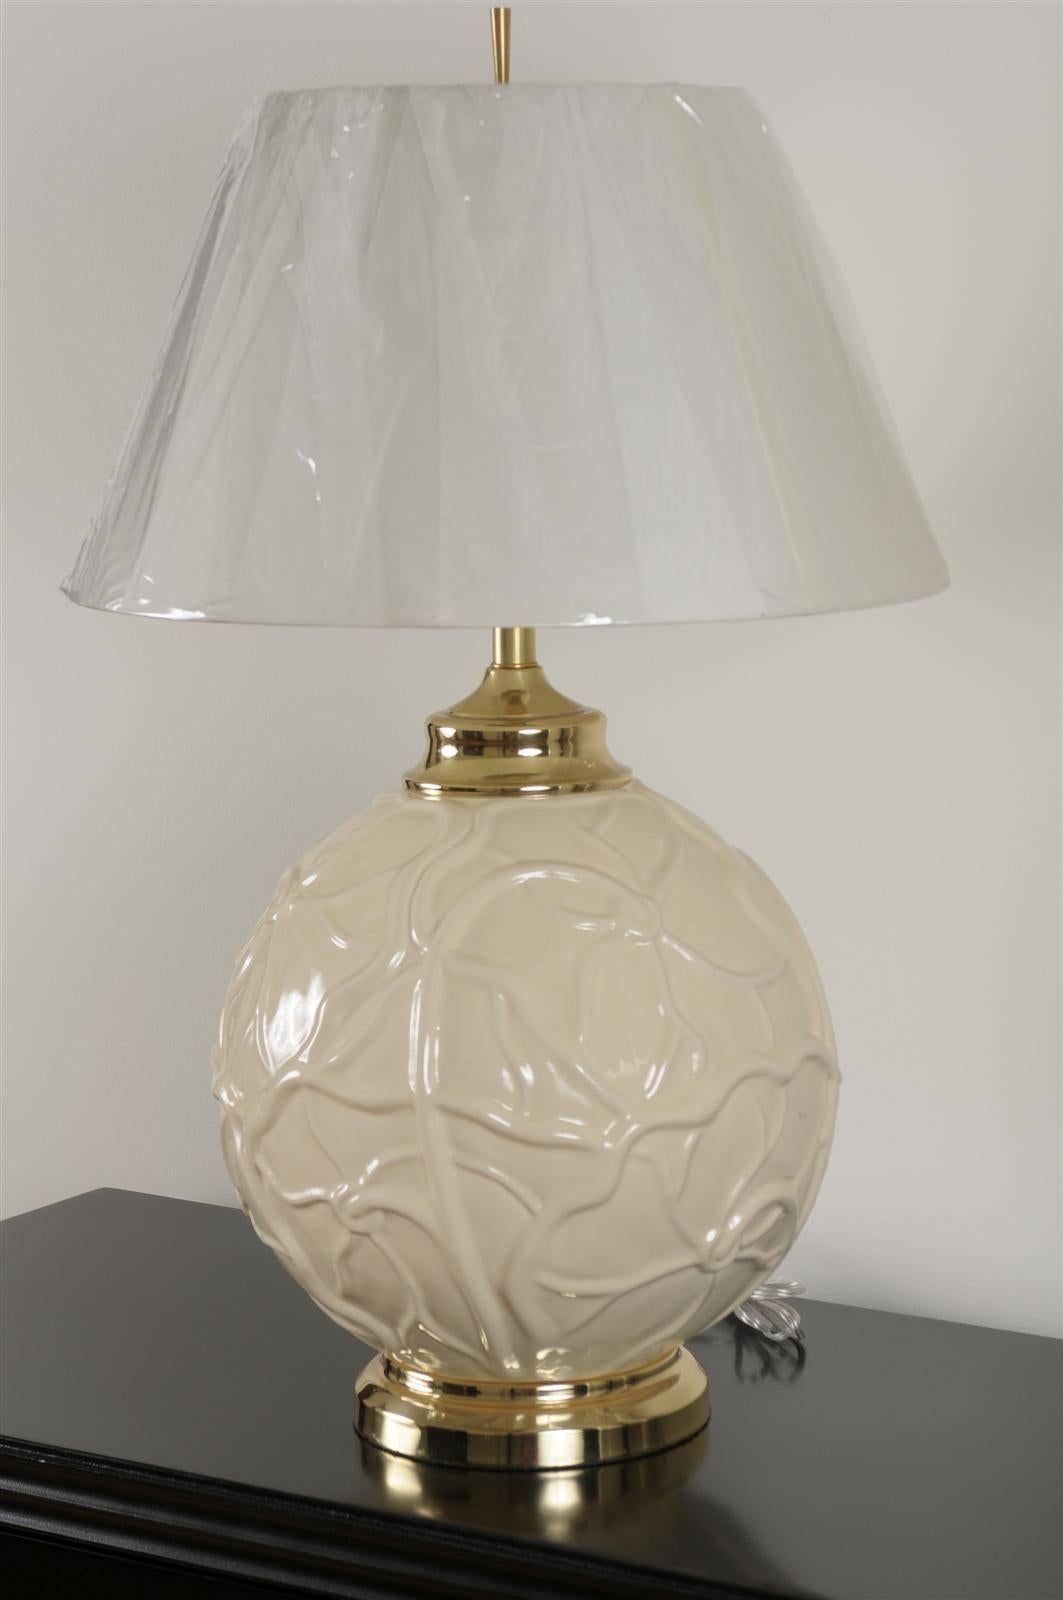 Outstanding Pair of Vintage Ceramic Lily Pad Lamps In Excellent Condition For Sale In Atlanta, GA